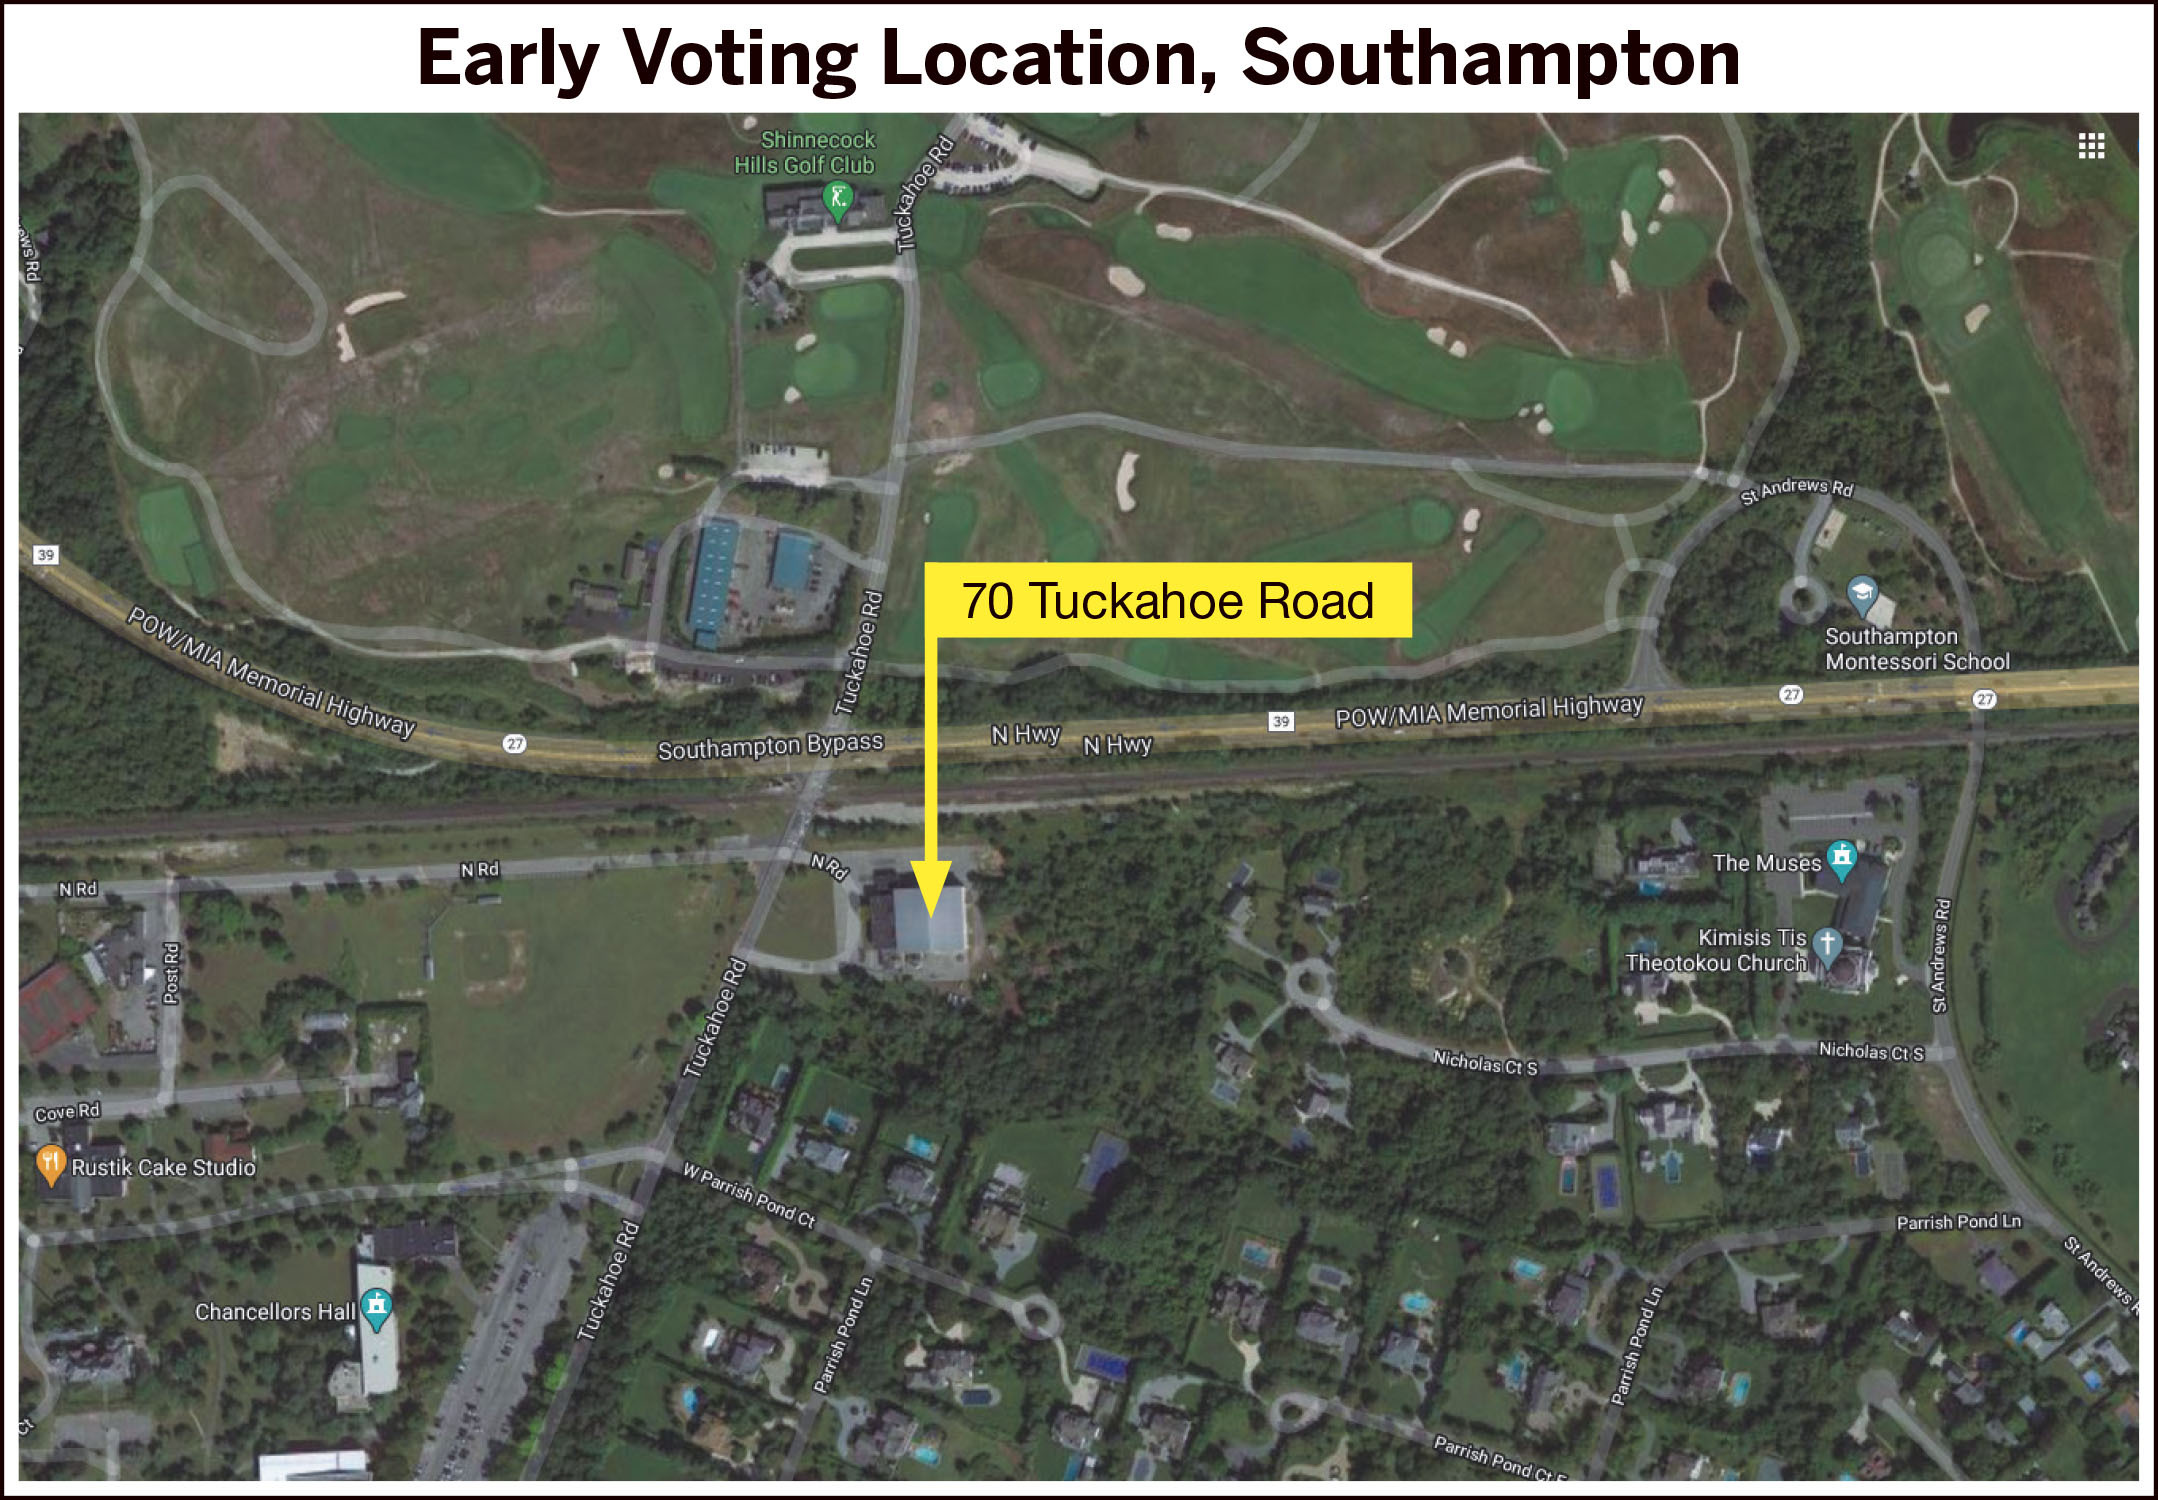 Early voting will be at 70 Tuckahoe Road, the gymnasium at Stony Brook University-Southampton campus.